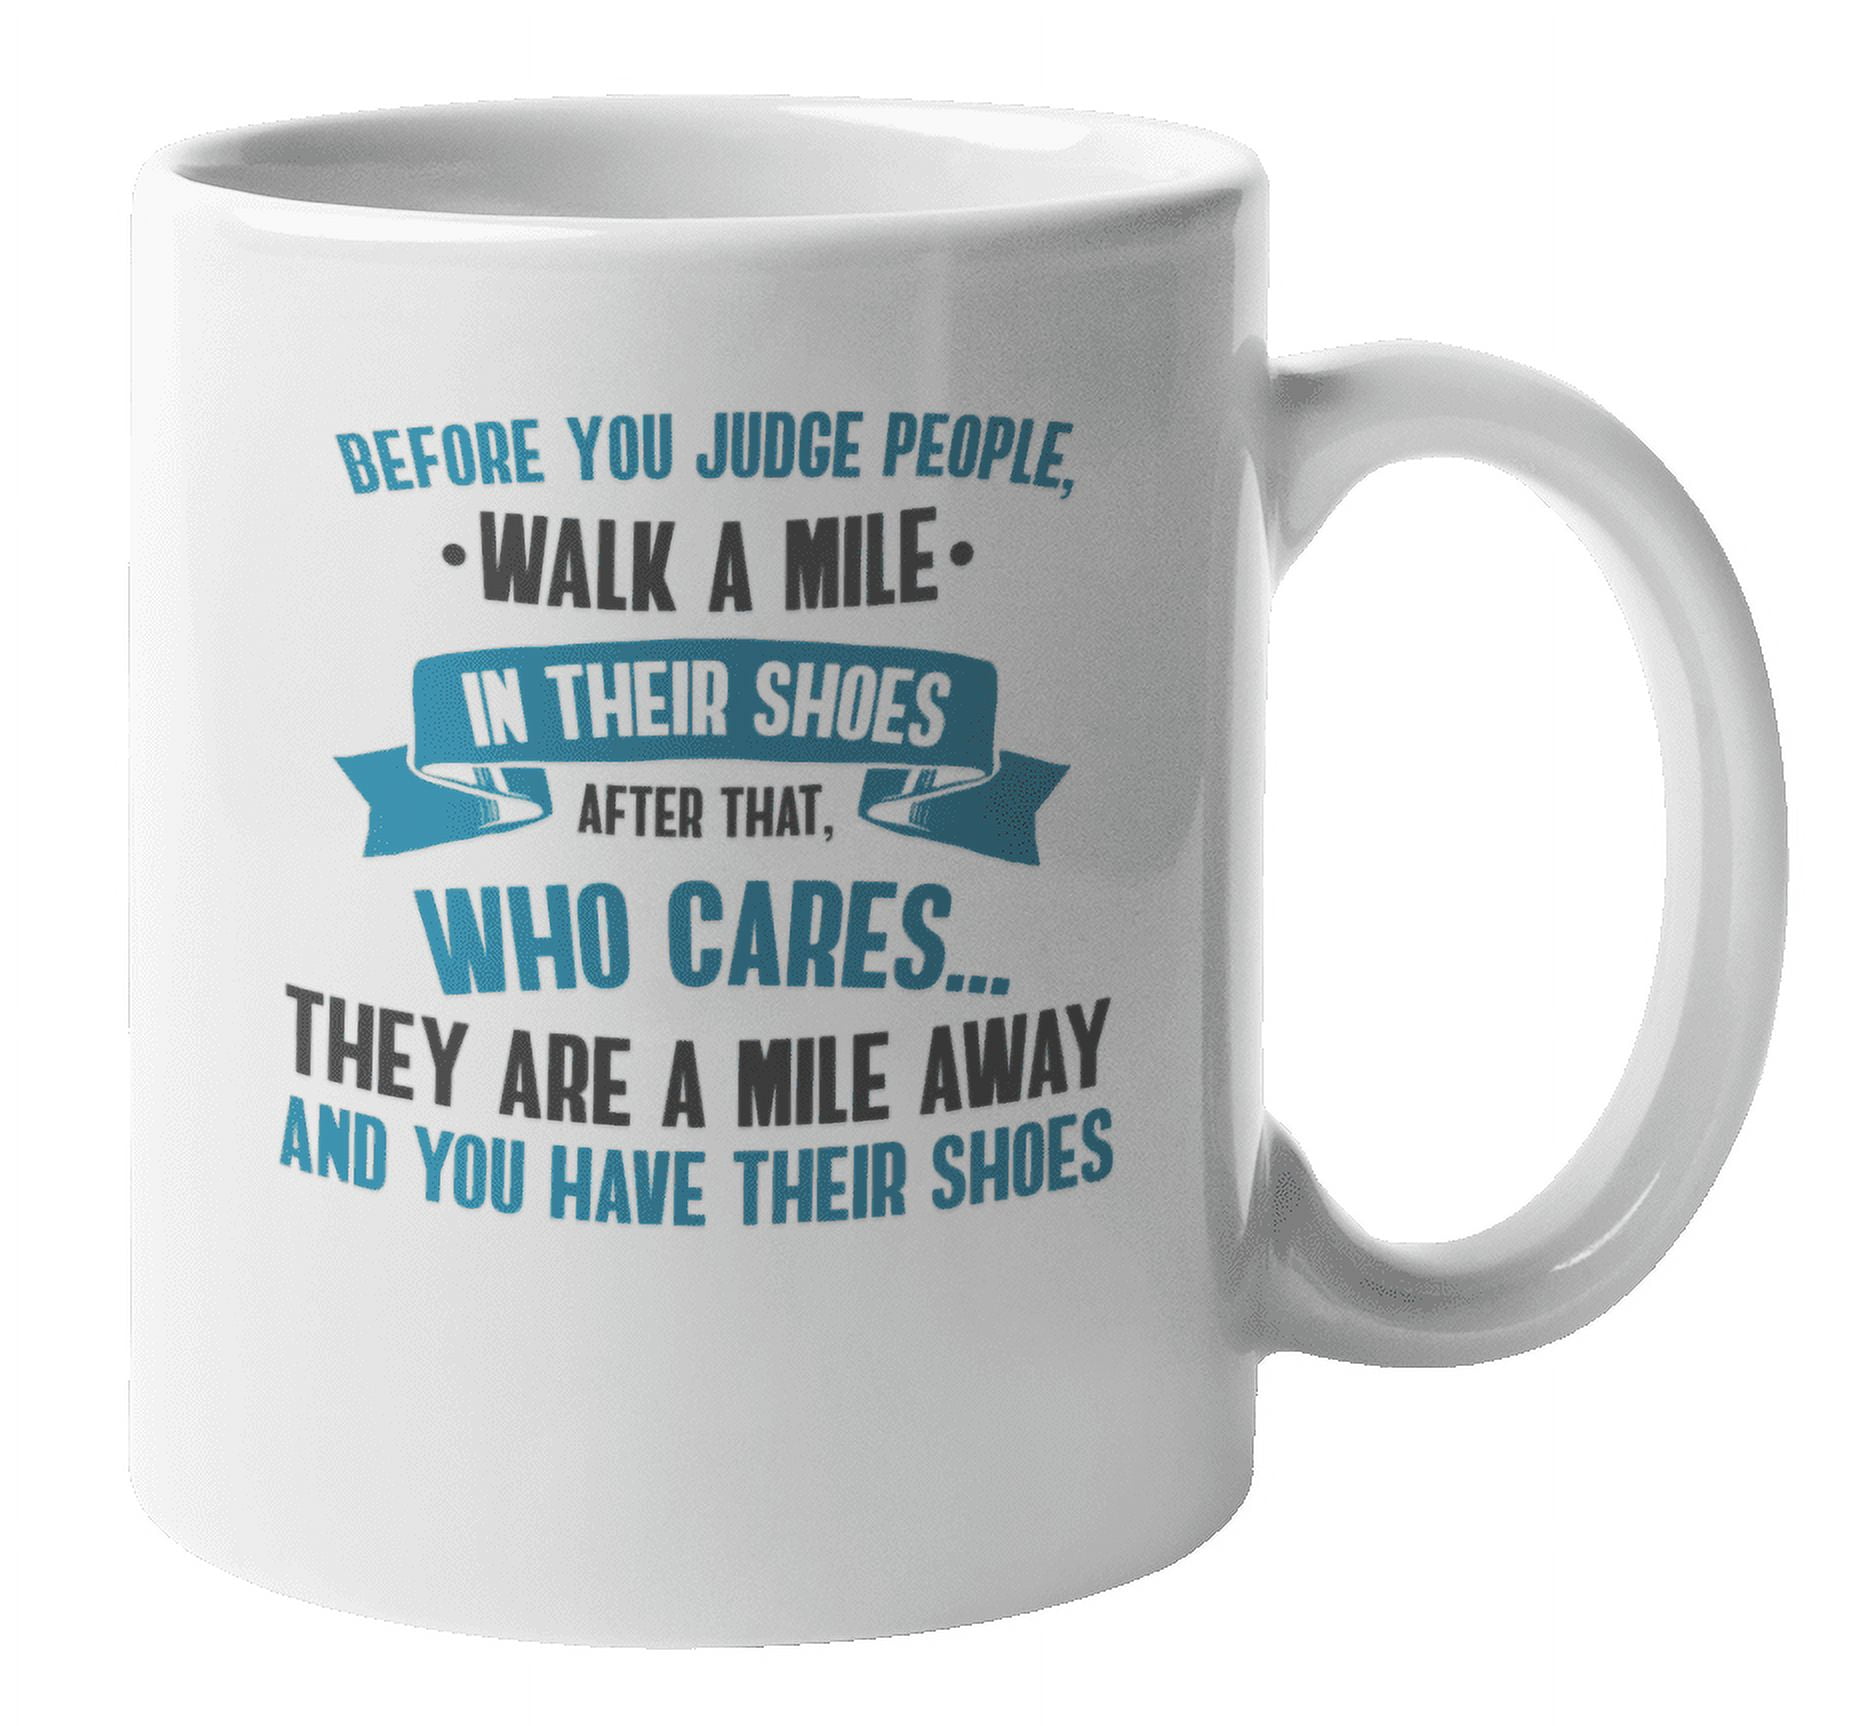  Coffee Drinker Gift ~ best funny coffee lovers mug ever for  home coffee shop assistant, inspirational quote gifts for men/women/friends  - White 11 ounce : Home & Kitchen